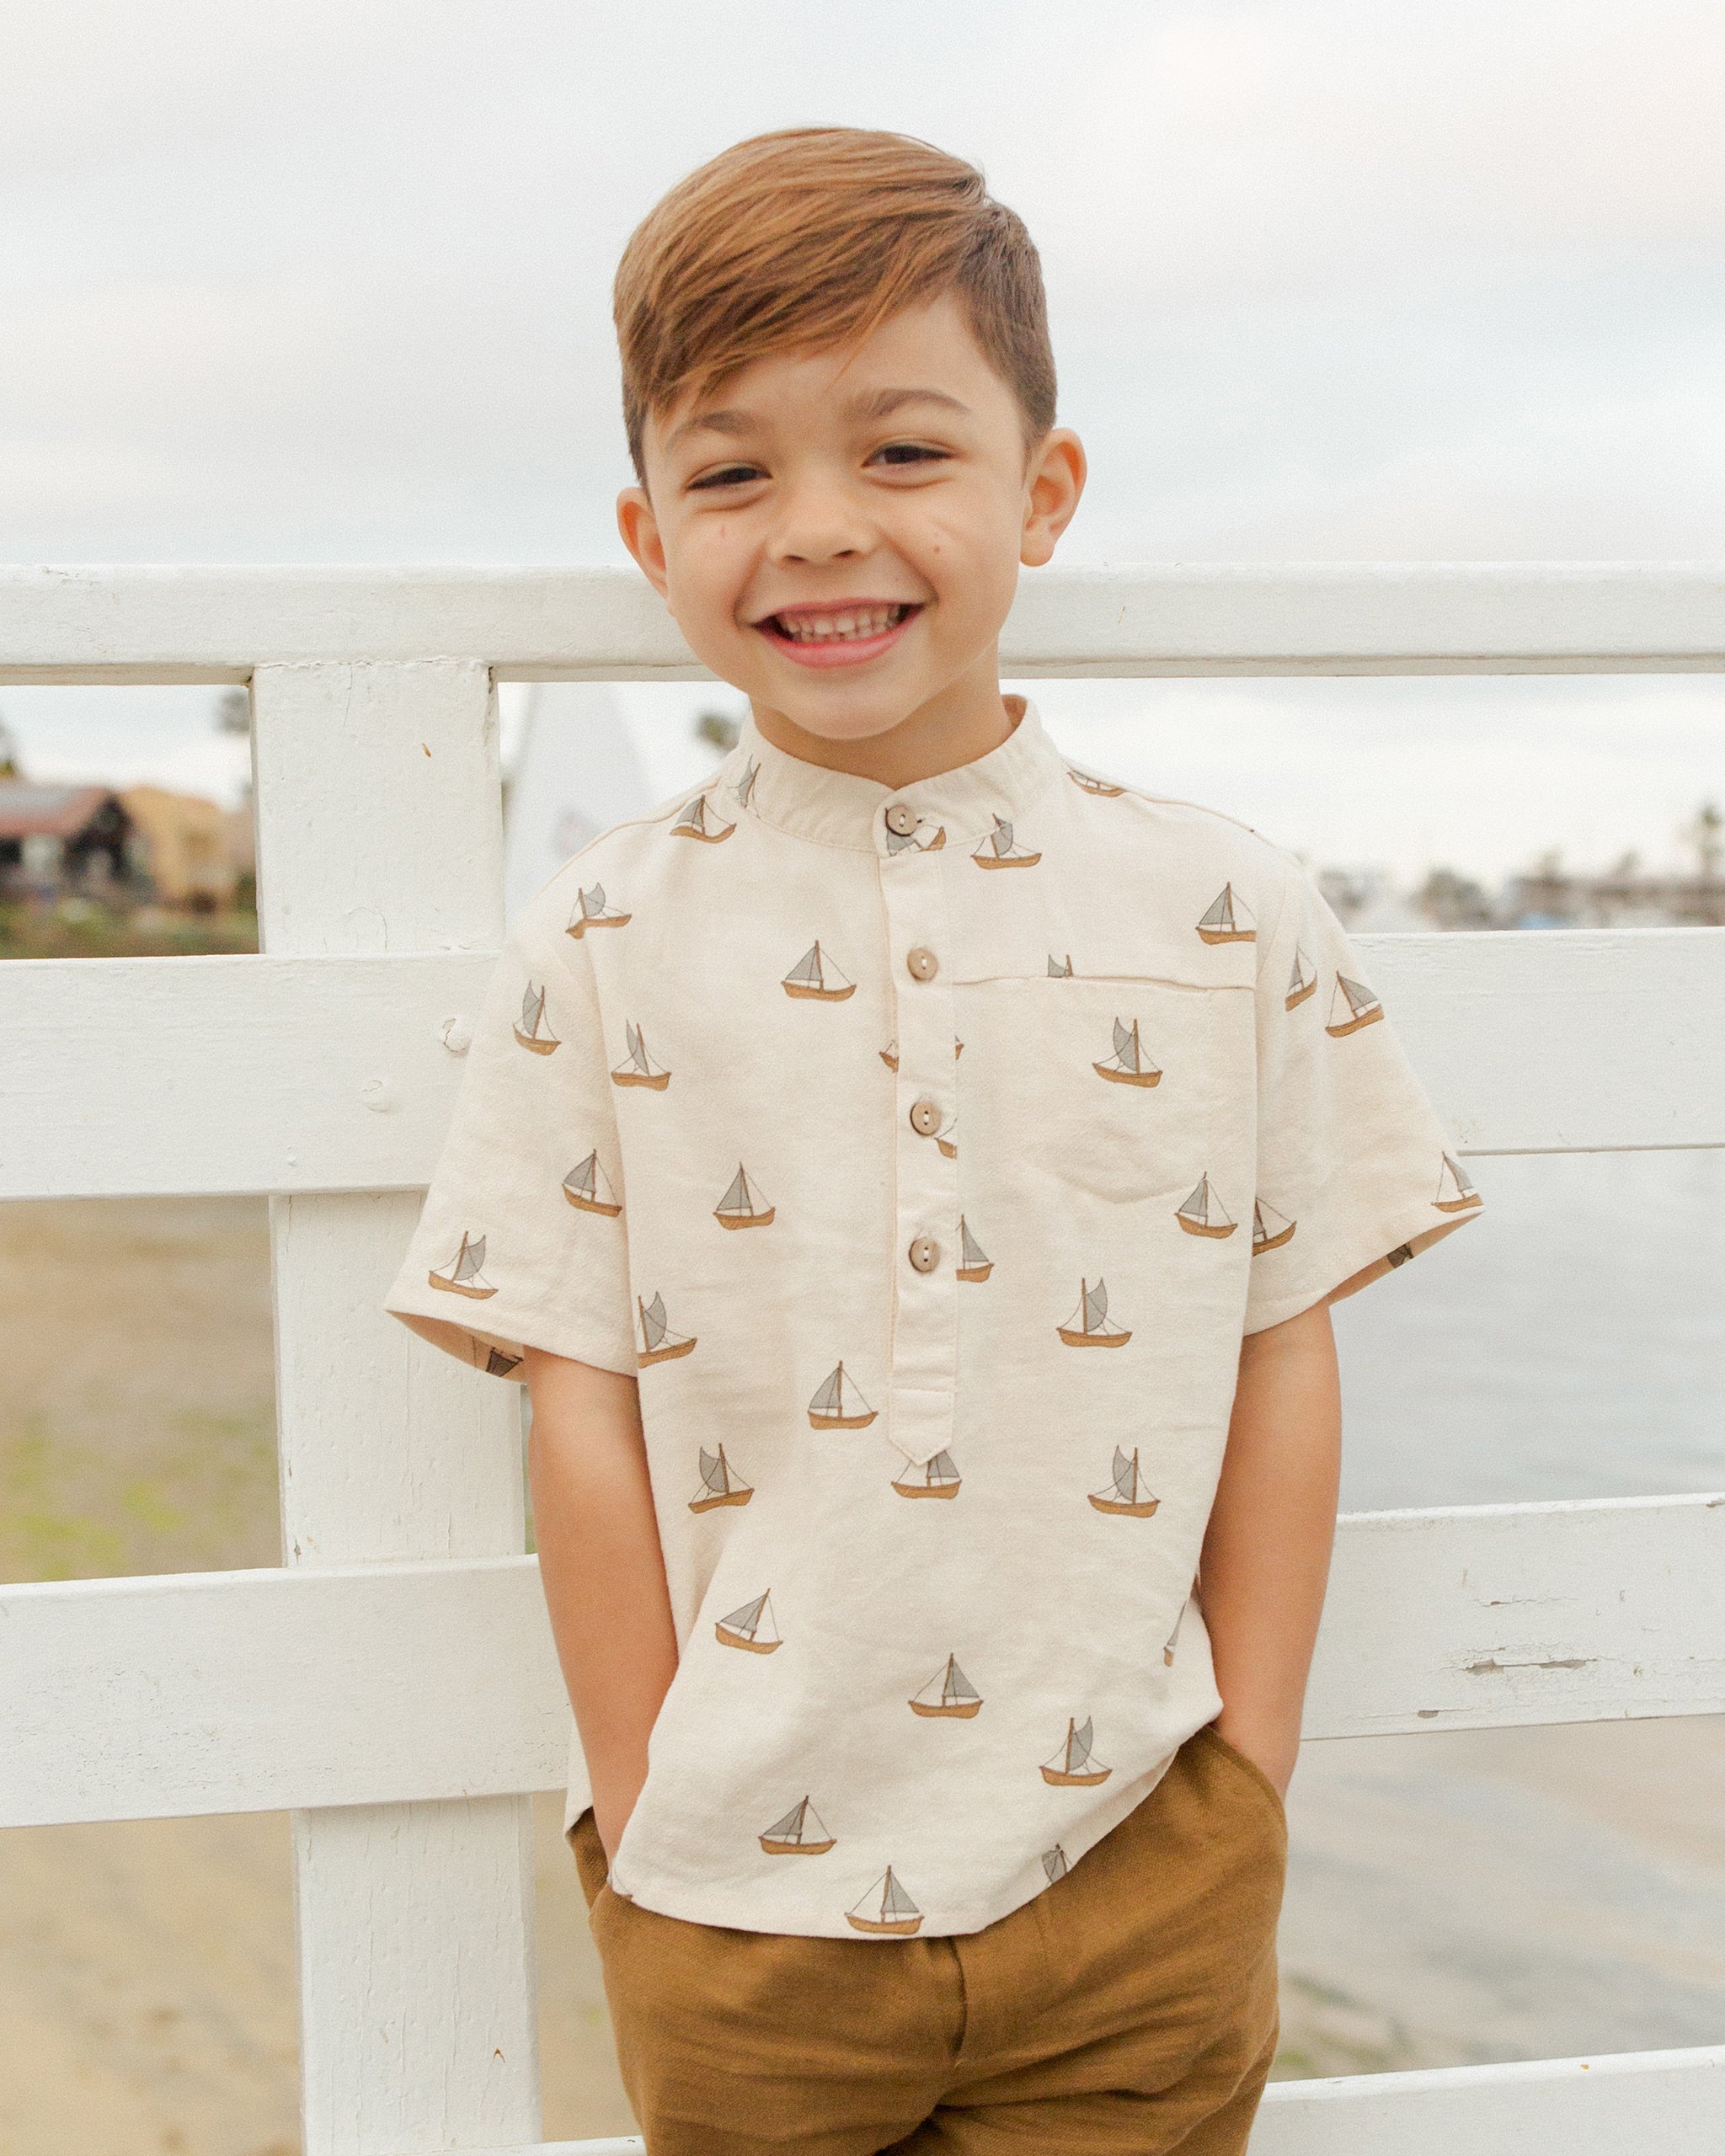 Mason Shirt || Sailboats - Rylee + Cru | Kids Clothes | Trendy Baby Clothes | Modern Infant Outfits |